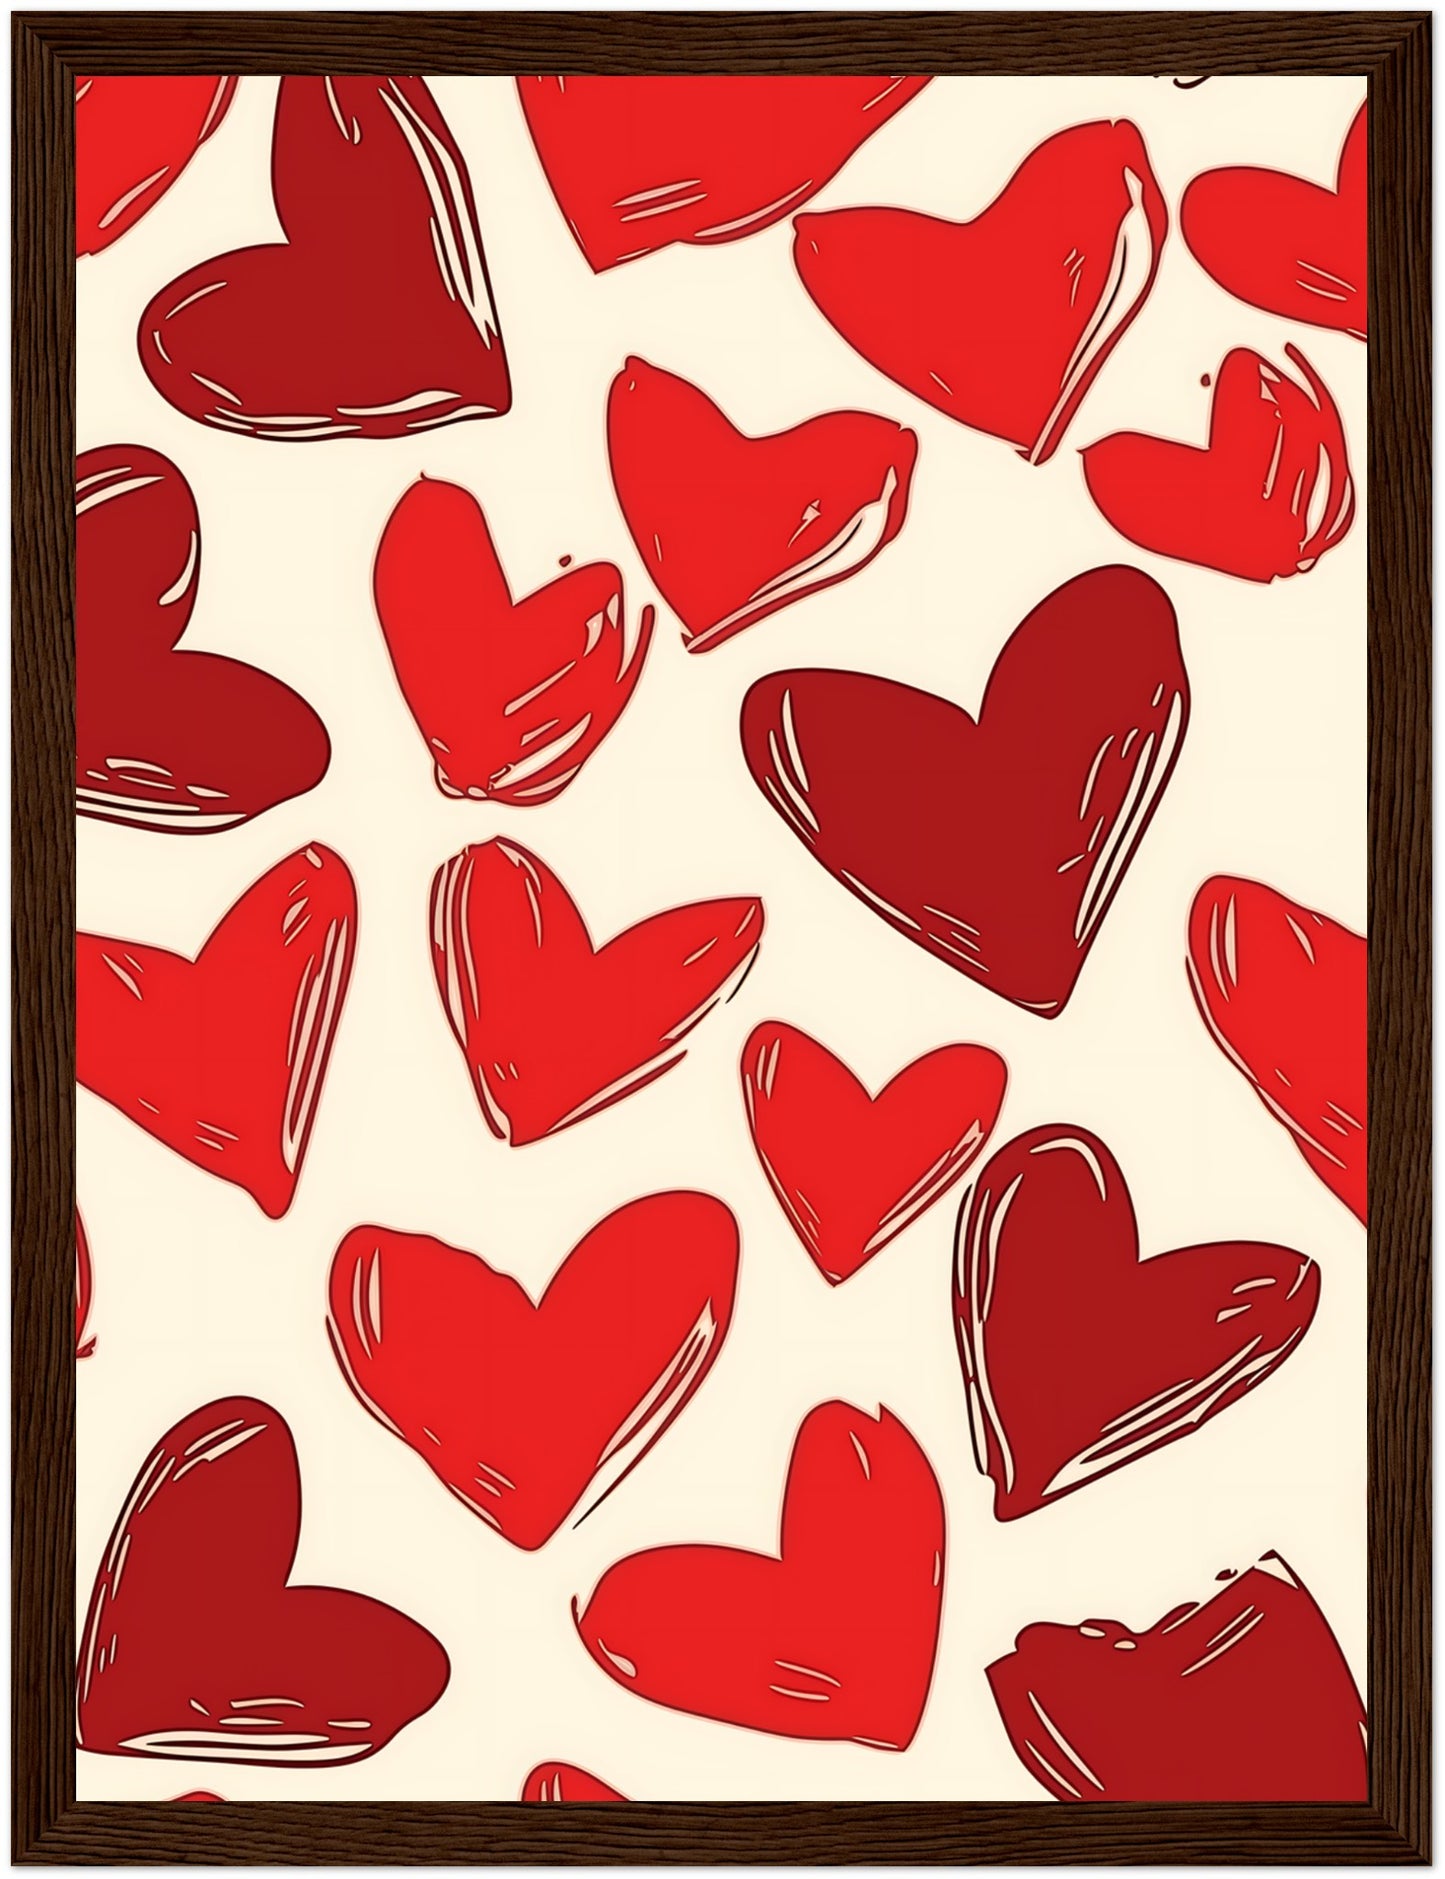 Illustration of multiple red hearts of various sizes on a pale background with a dark frame.